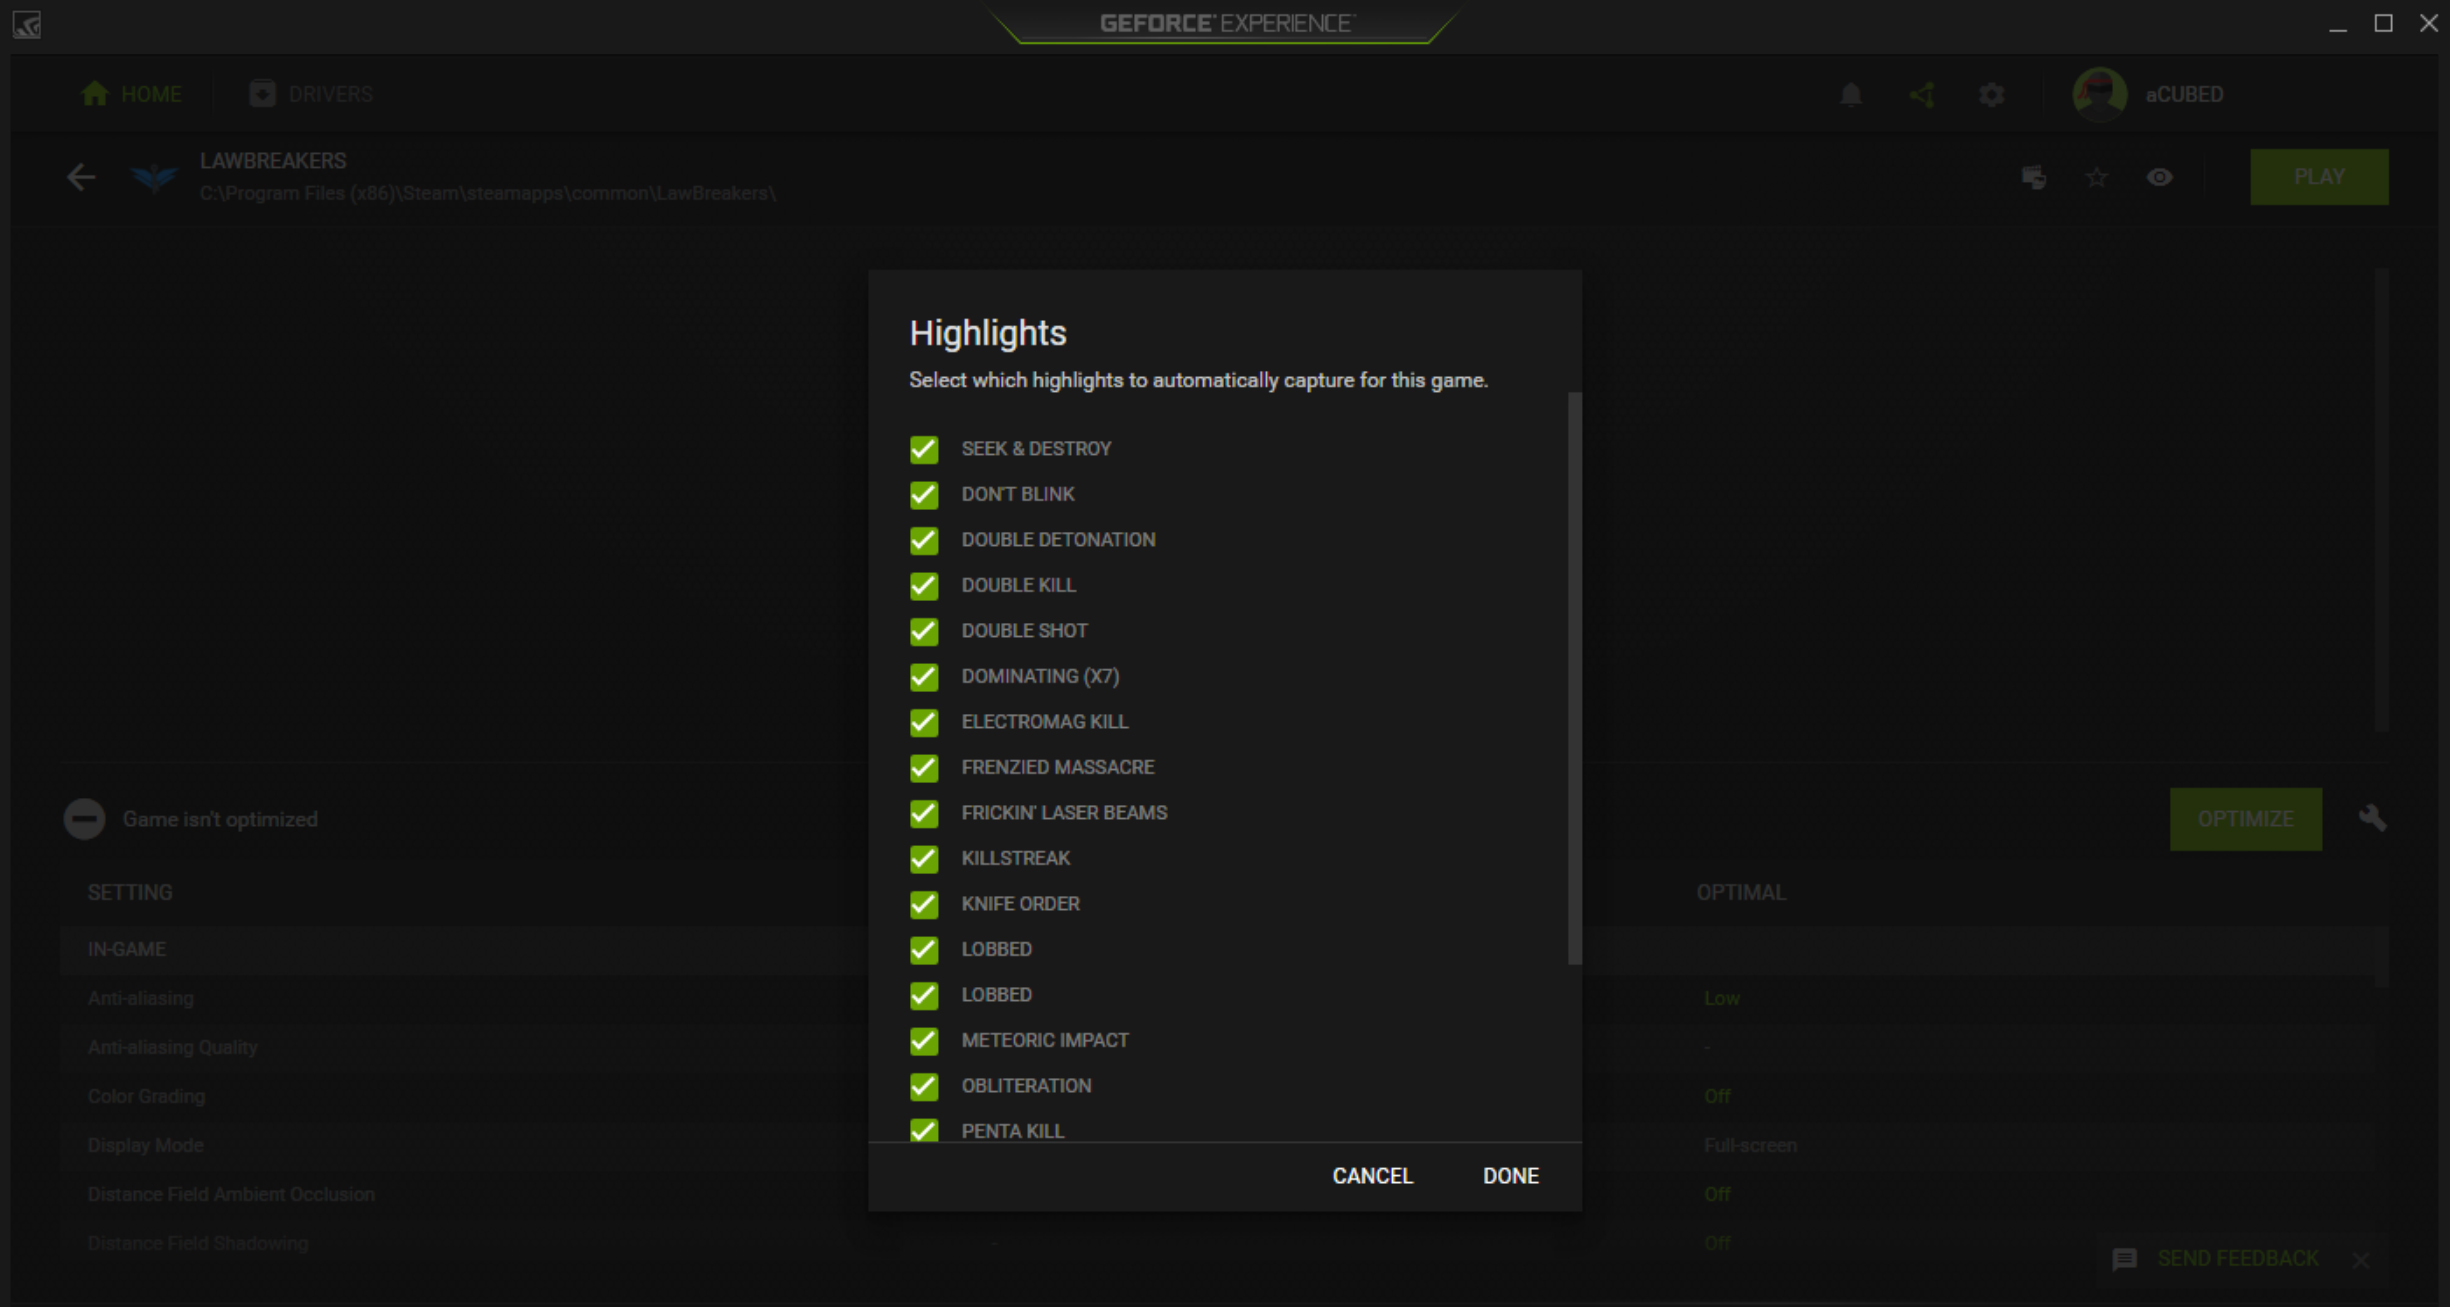 geforce-experience-shadowplay-highlights-lawbreakers-select-highlights-that-are-recorded.jpg